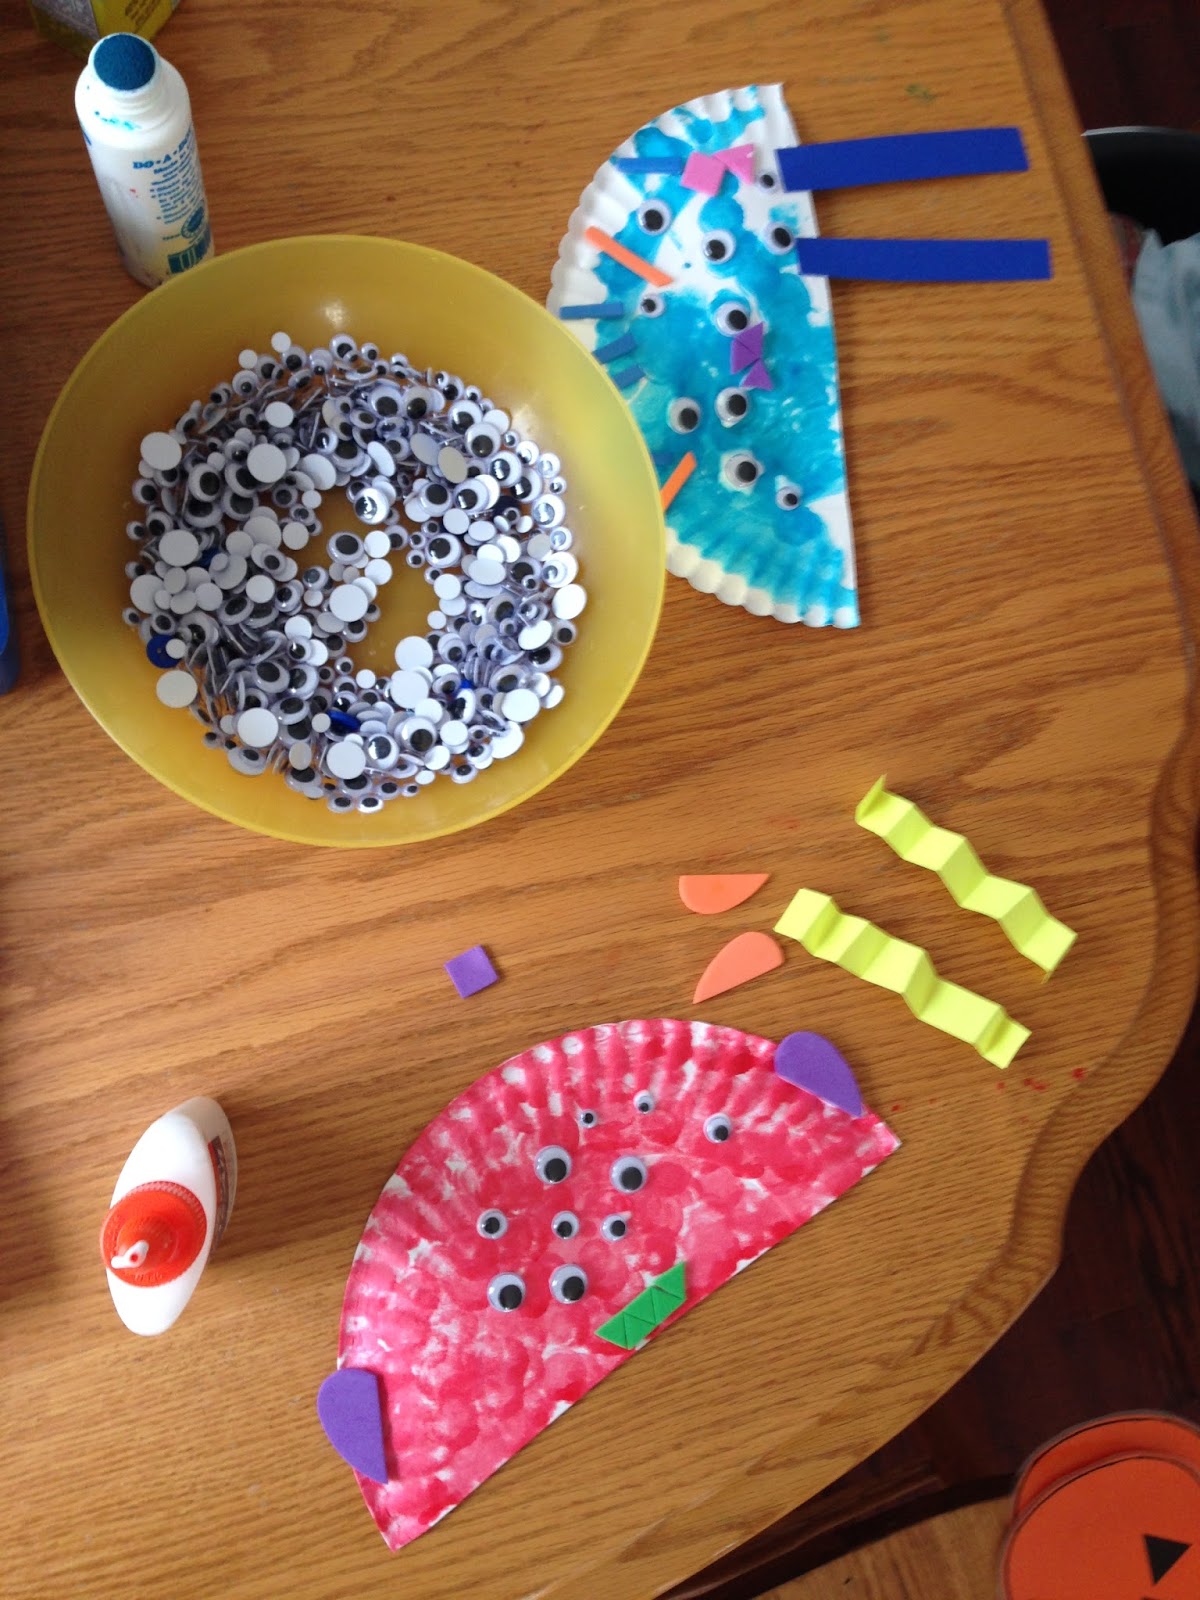 Toddler Approved!: Paper Plate Monster Craft